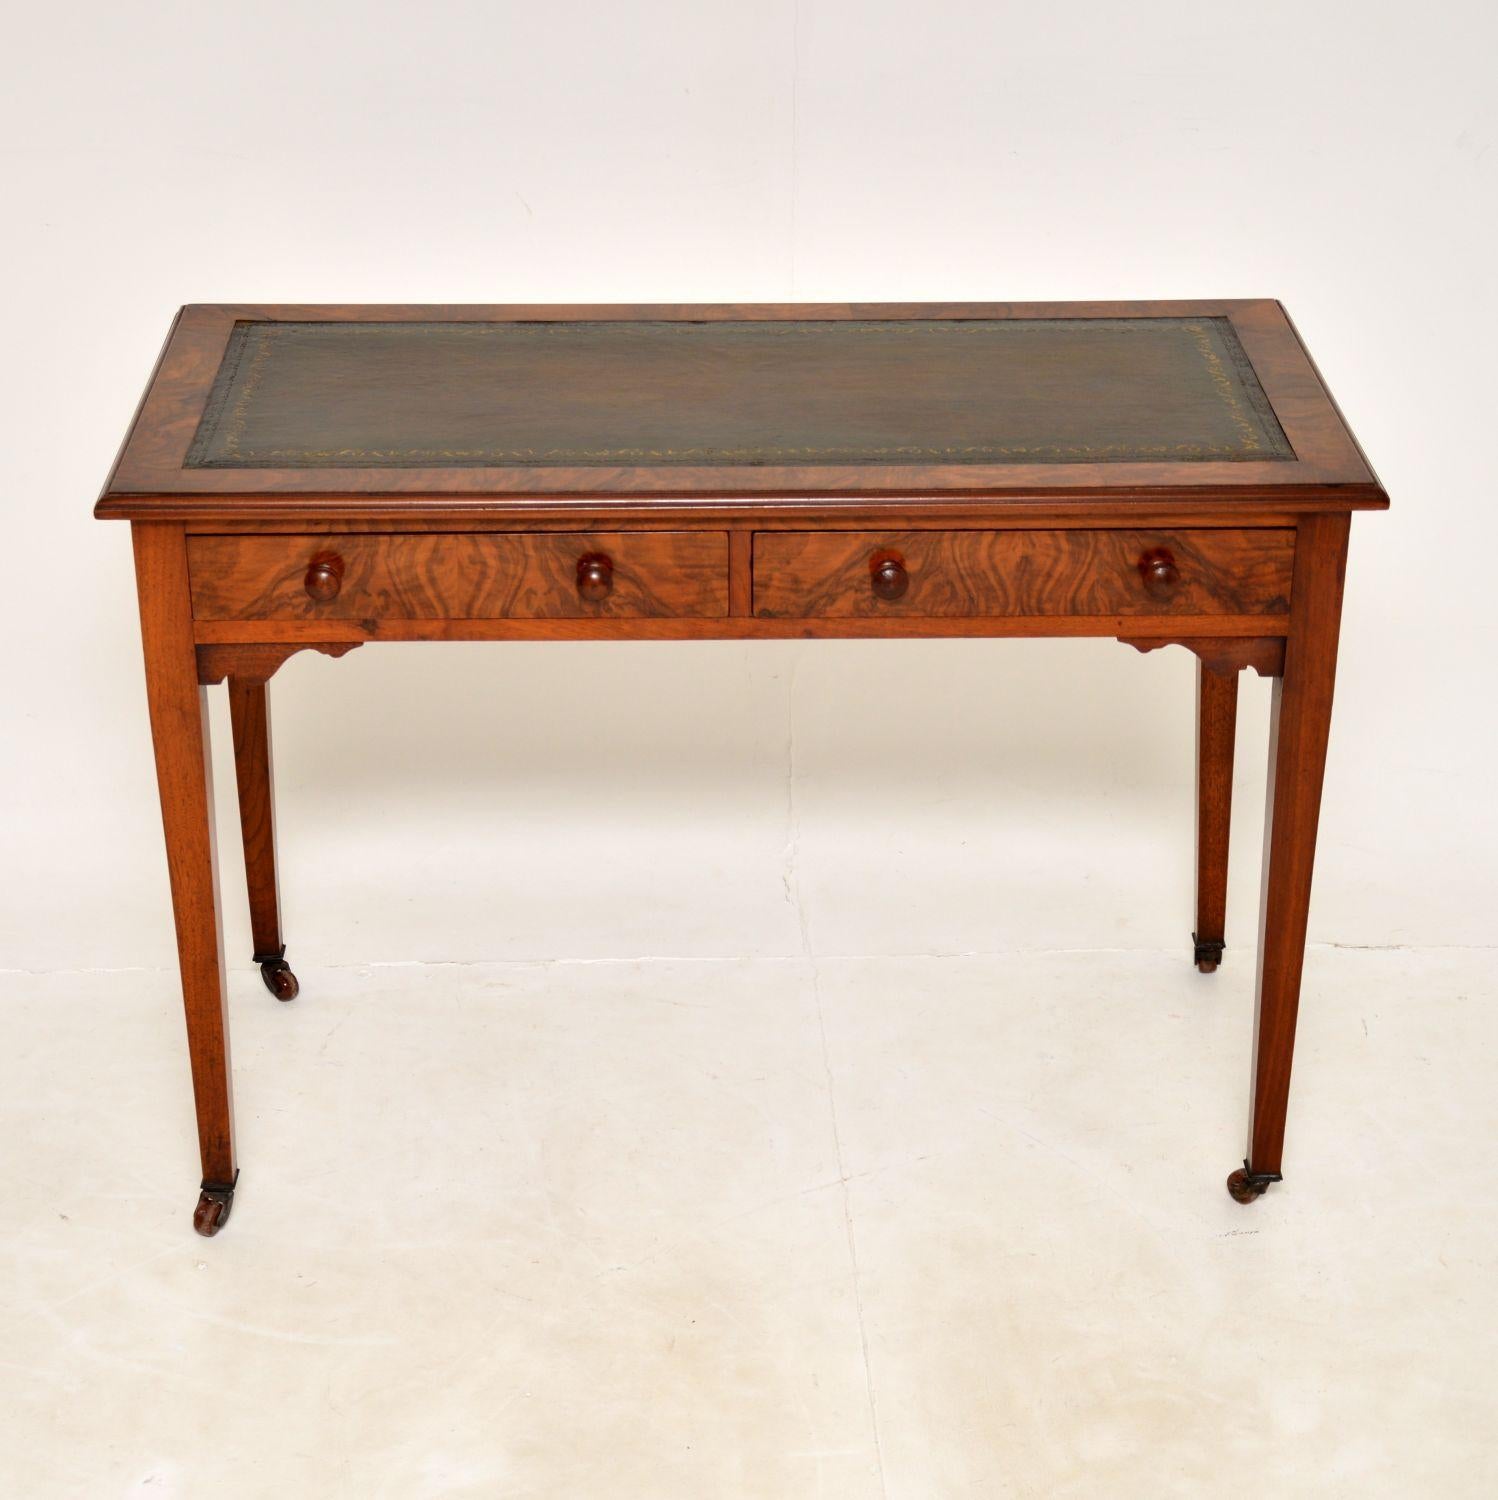 An excellent antique Victorian period leather top writing table in burr walnut. This was made in England, it dates from around the 1880-90’s period.
It is a very useful size and is of excellent quality. The inset leather top is gold tooled and hand